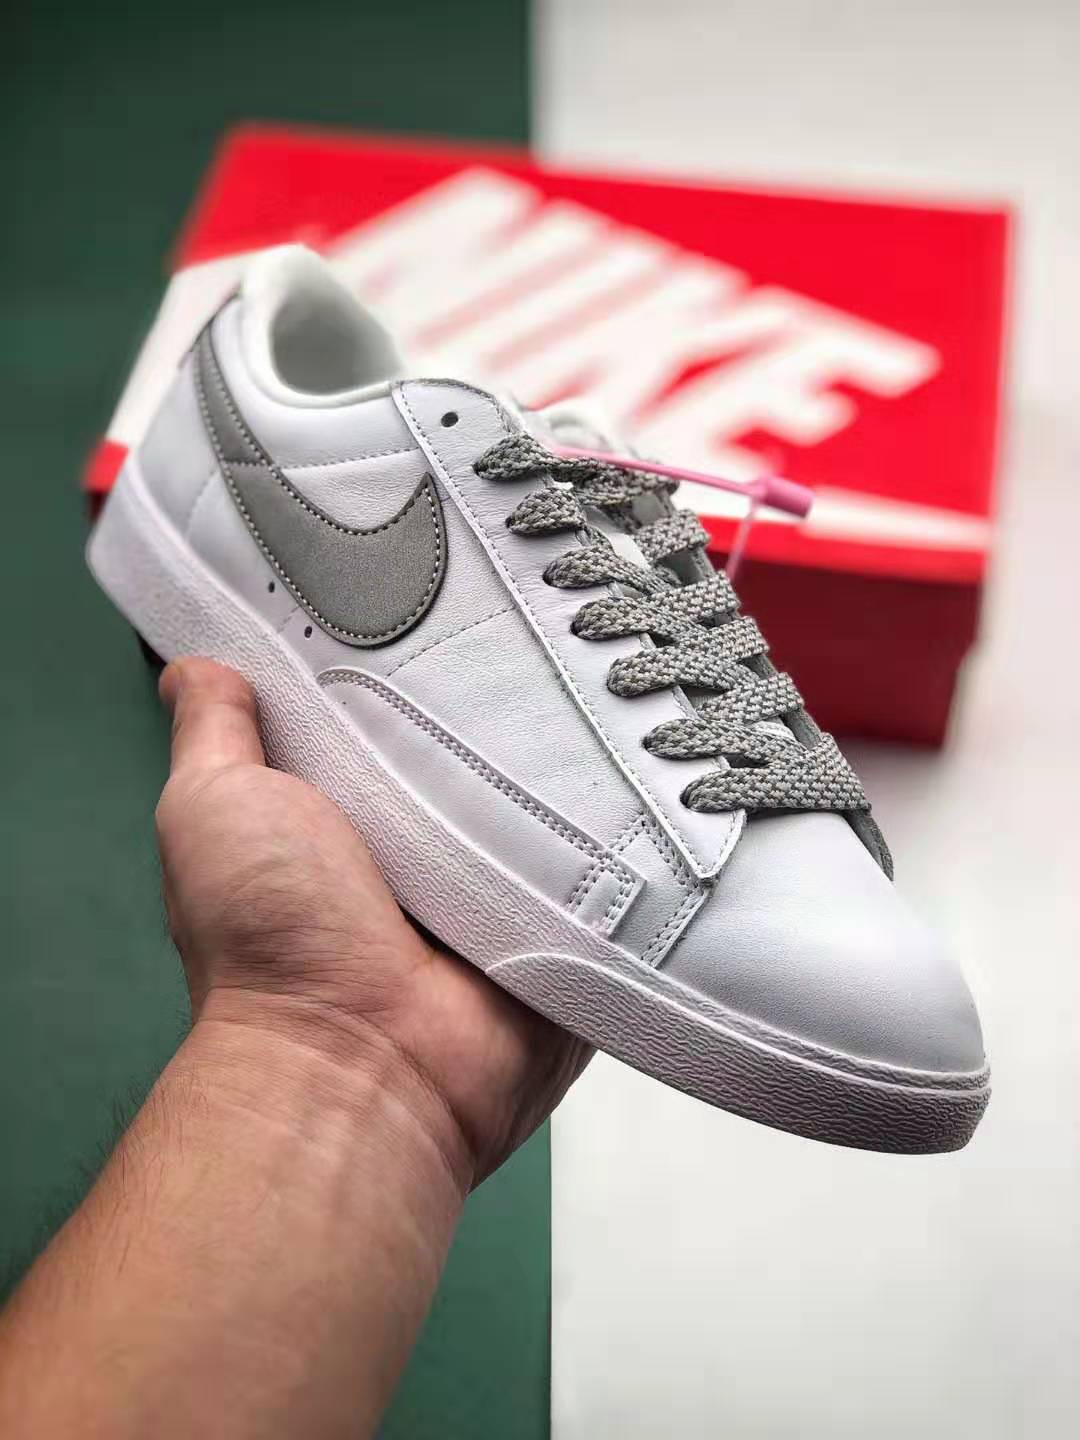 Nike Blazer Low LX White Gray Casual Shoes Womens 454471-106 - Stylish and comfortable footwear for women